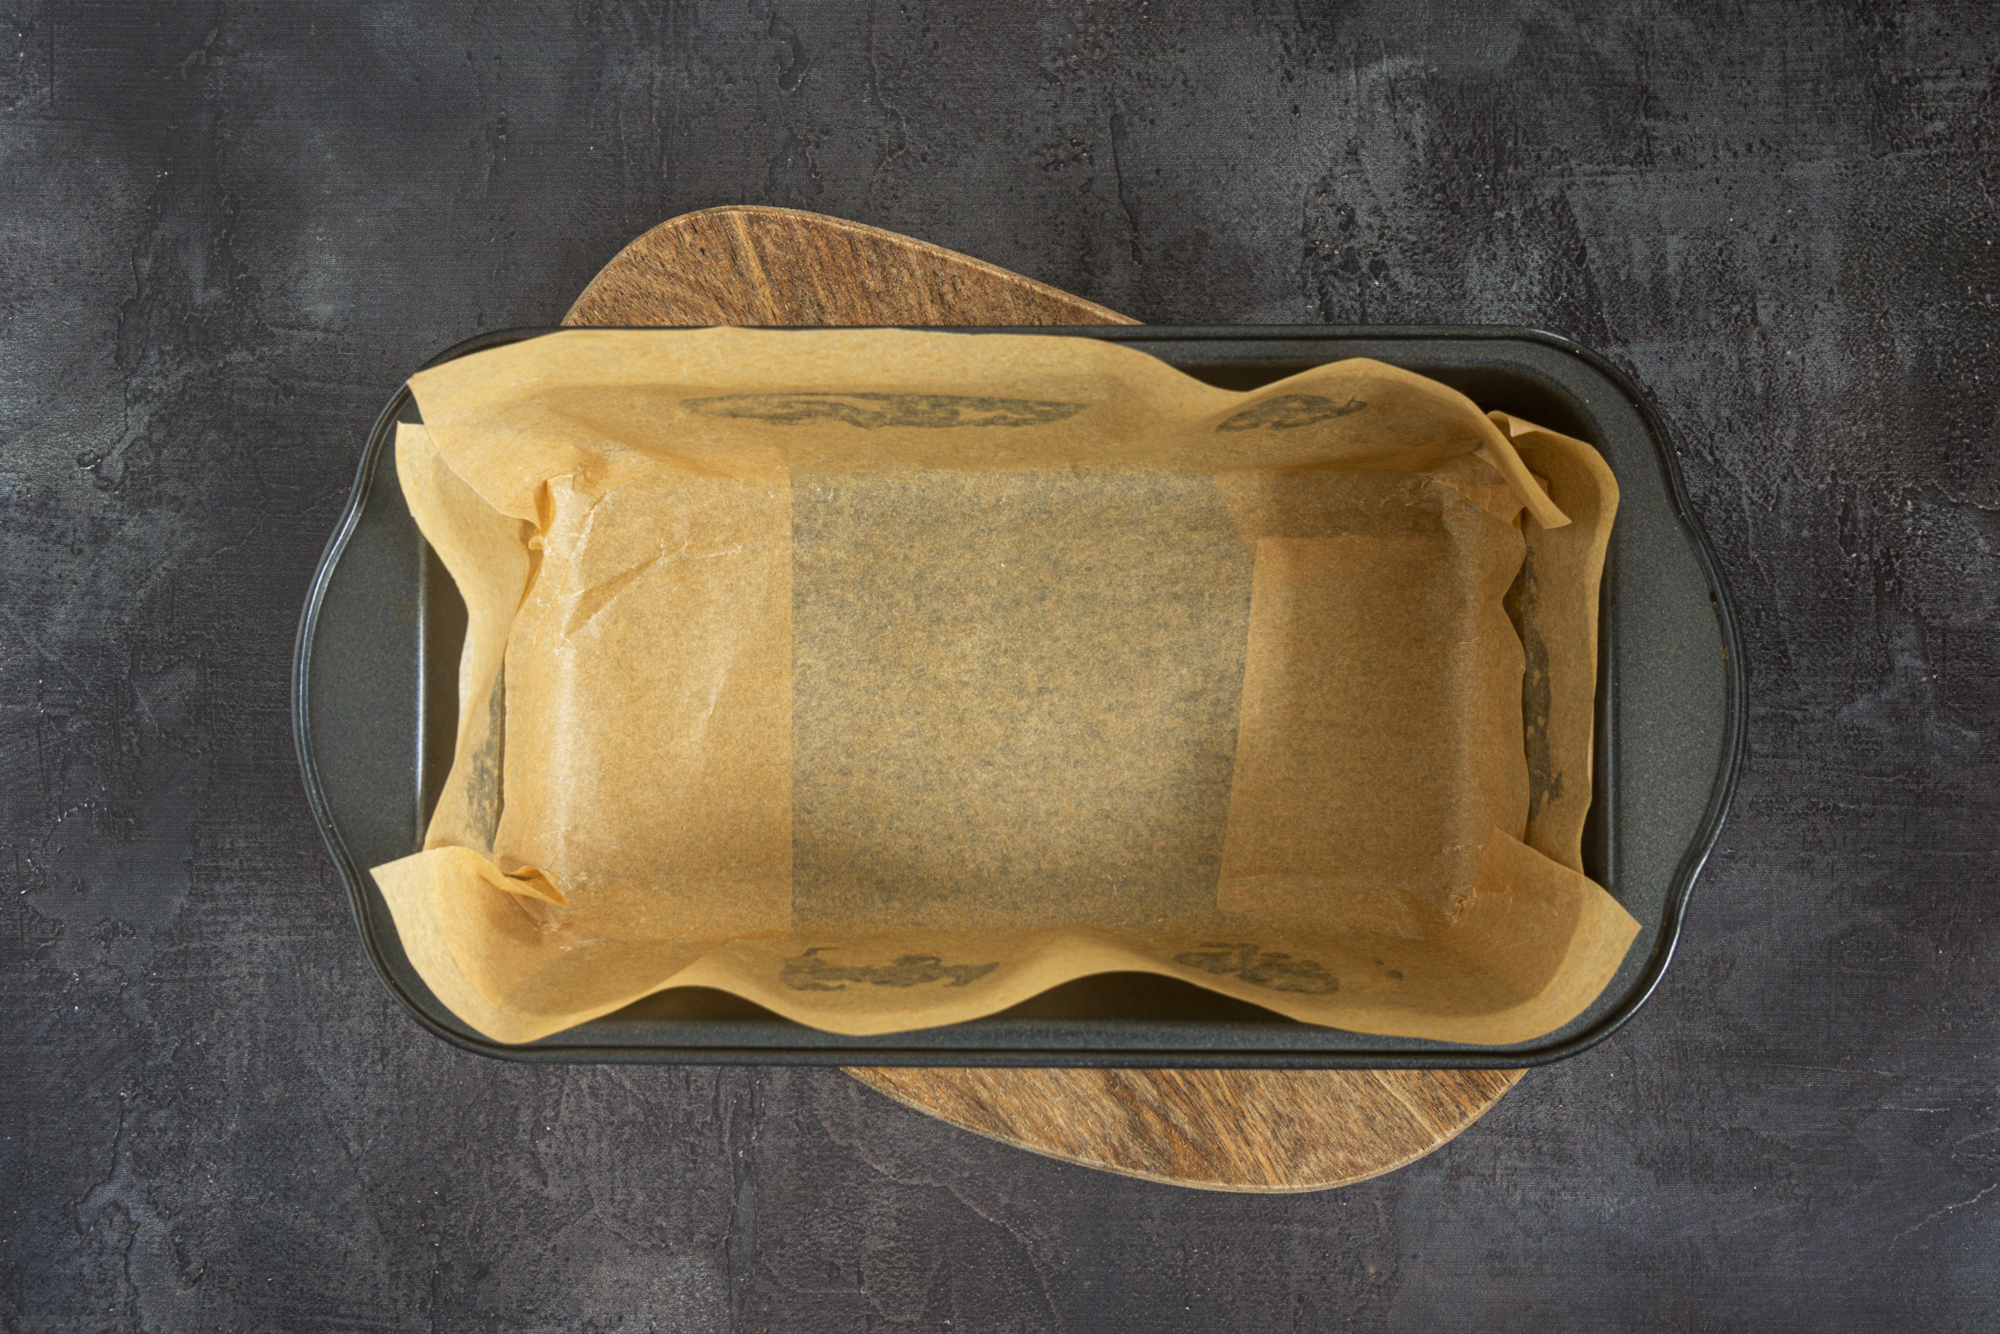 Baking pan lined with parchment paper